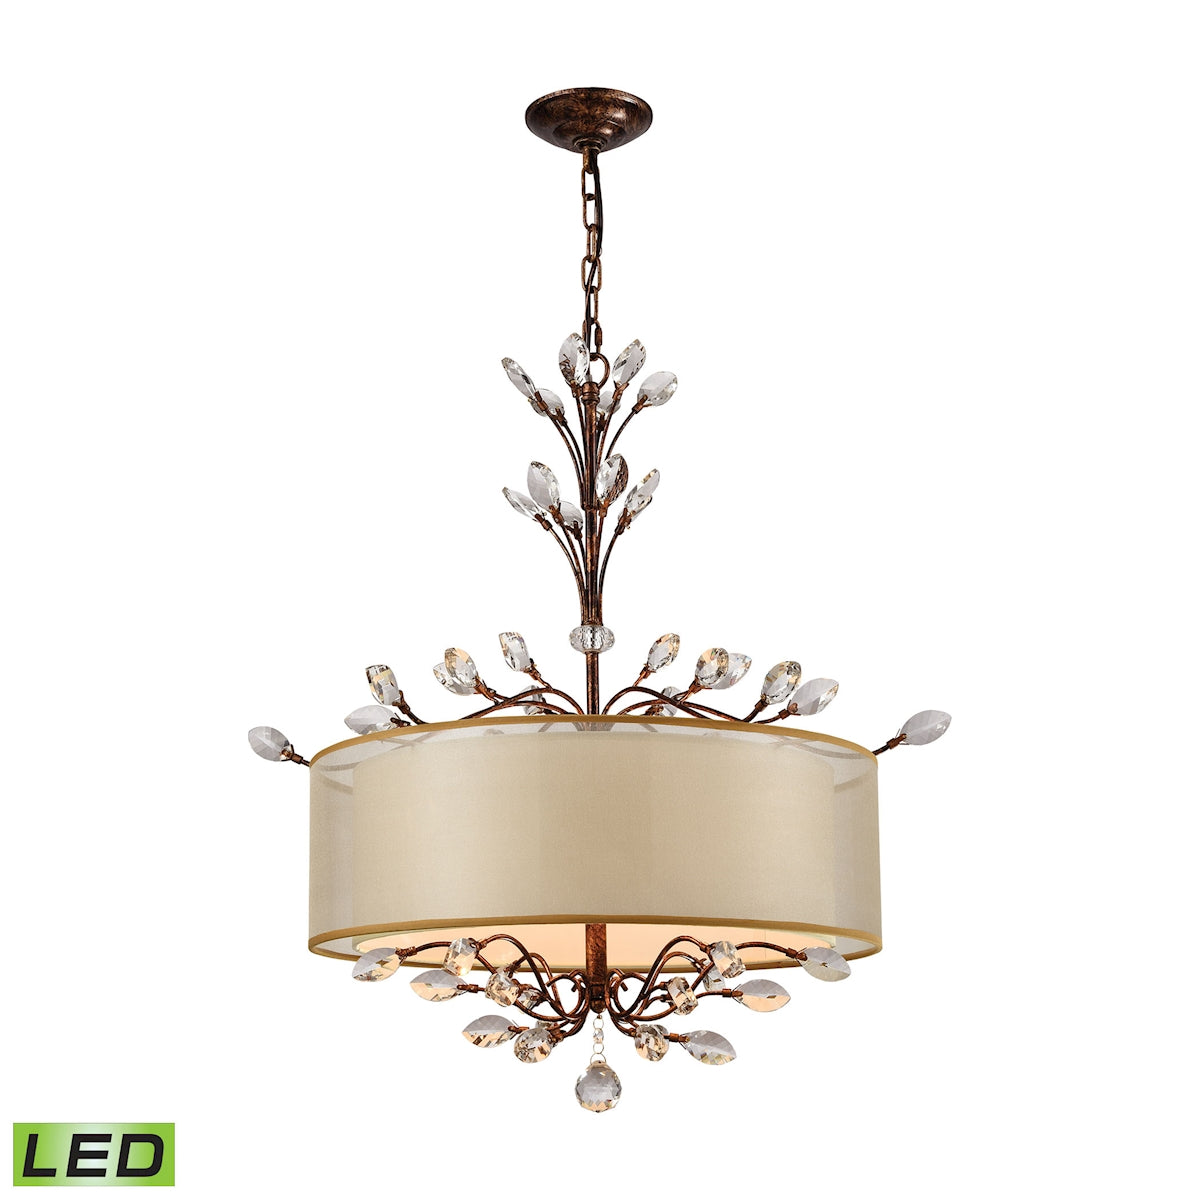 ELK Lighting 16292/4-LED Asbury 4-Light Chandelier in Spanish Bronze with Organza and Fabric Shade - Includes LED Bulbs